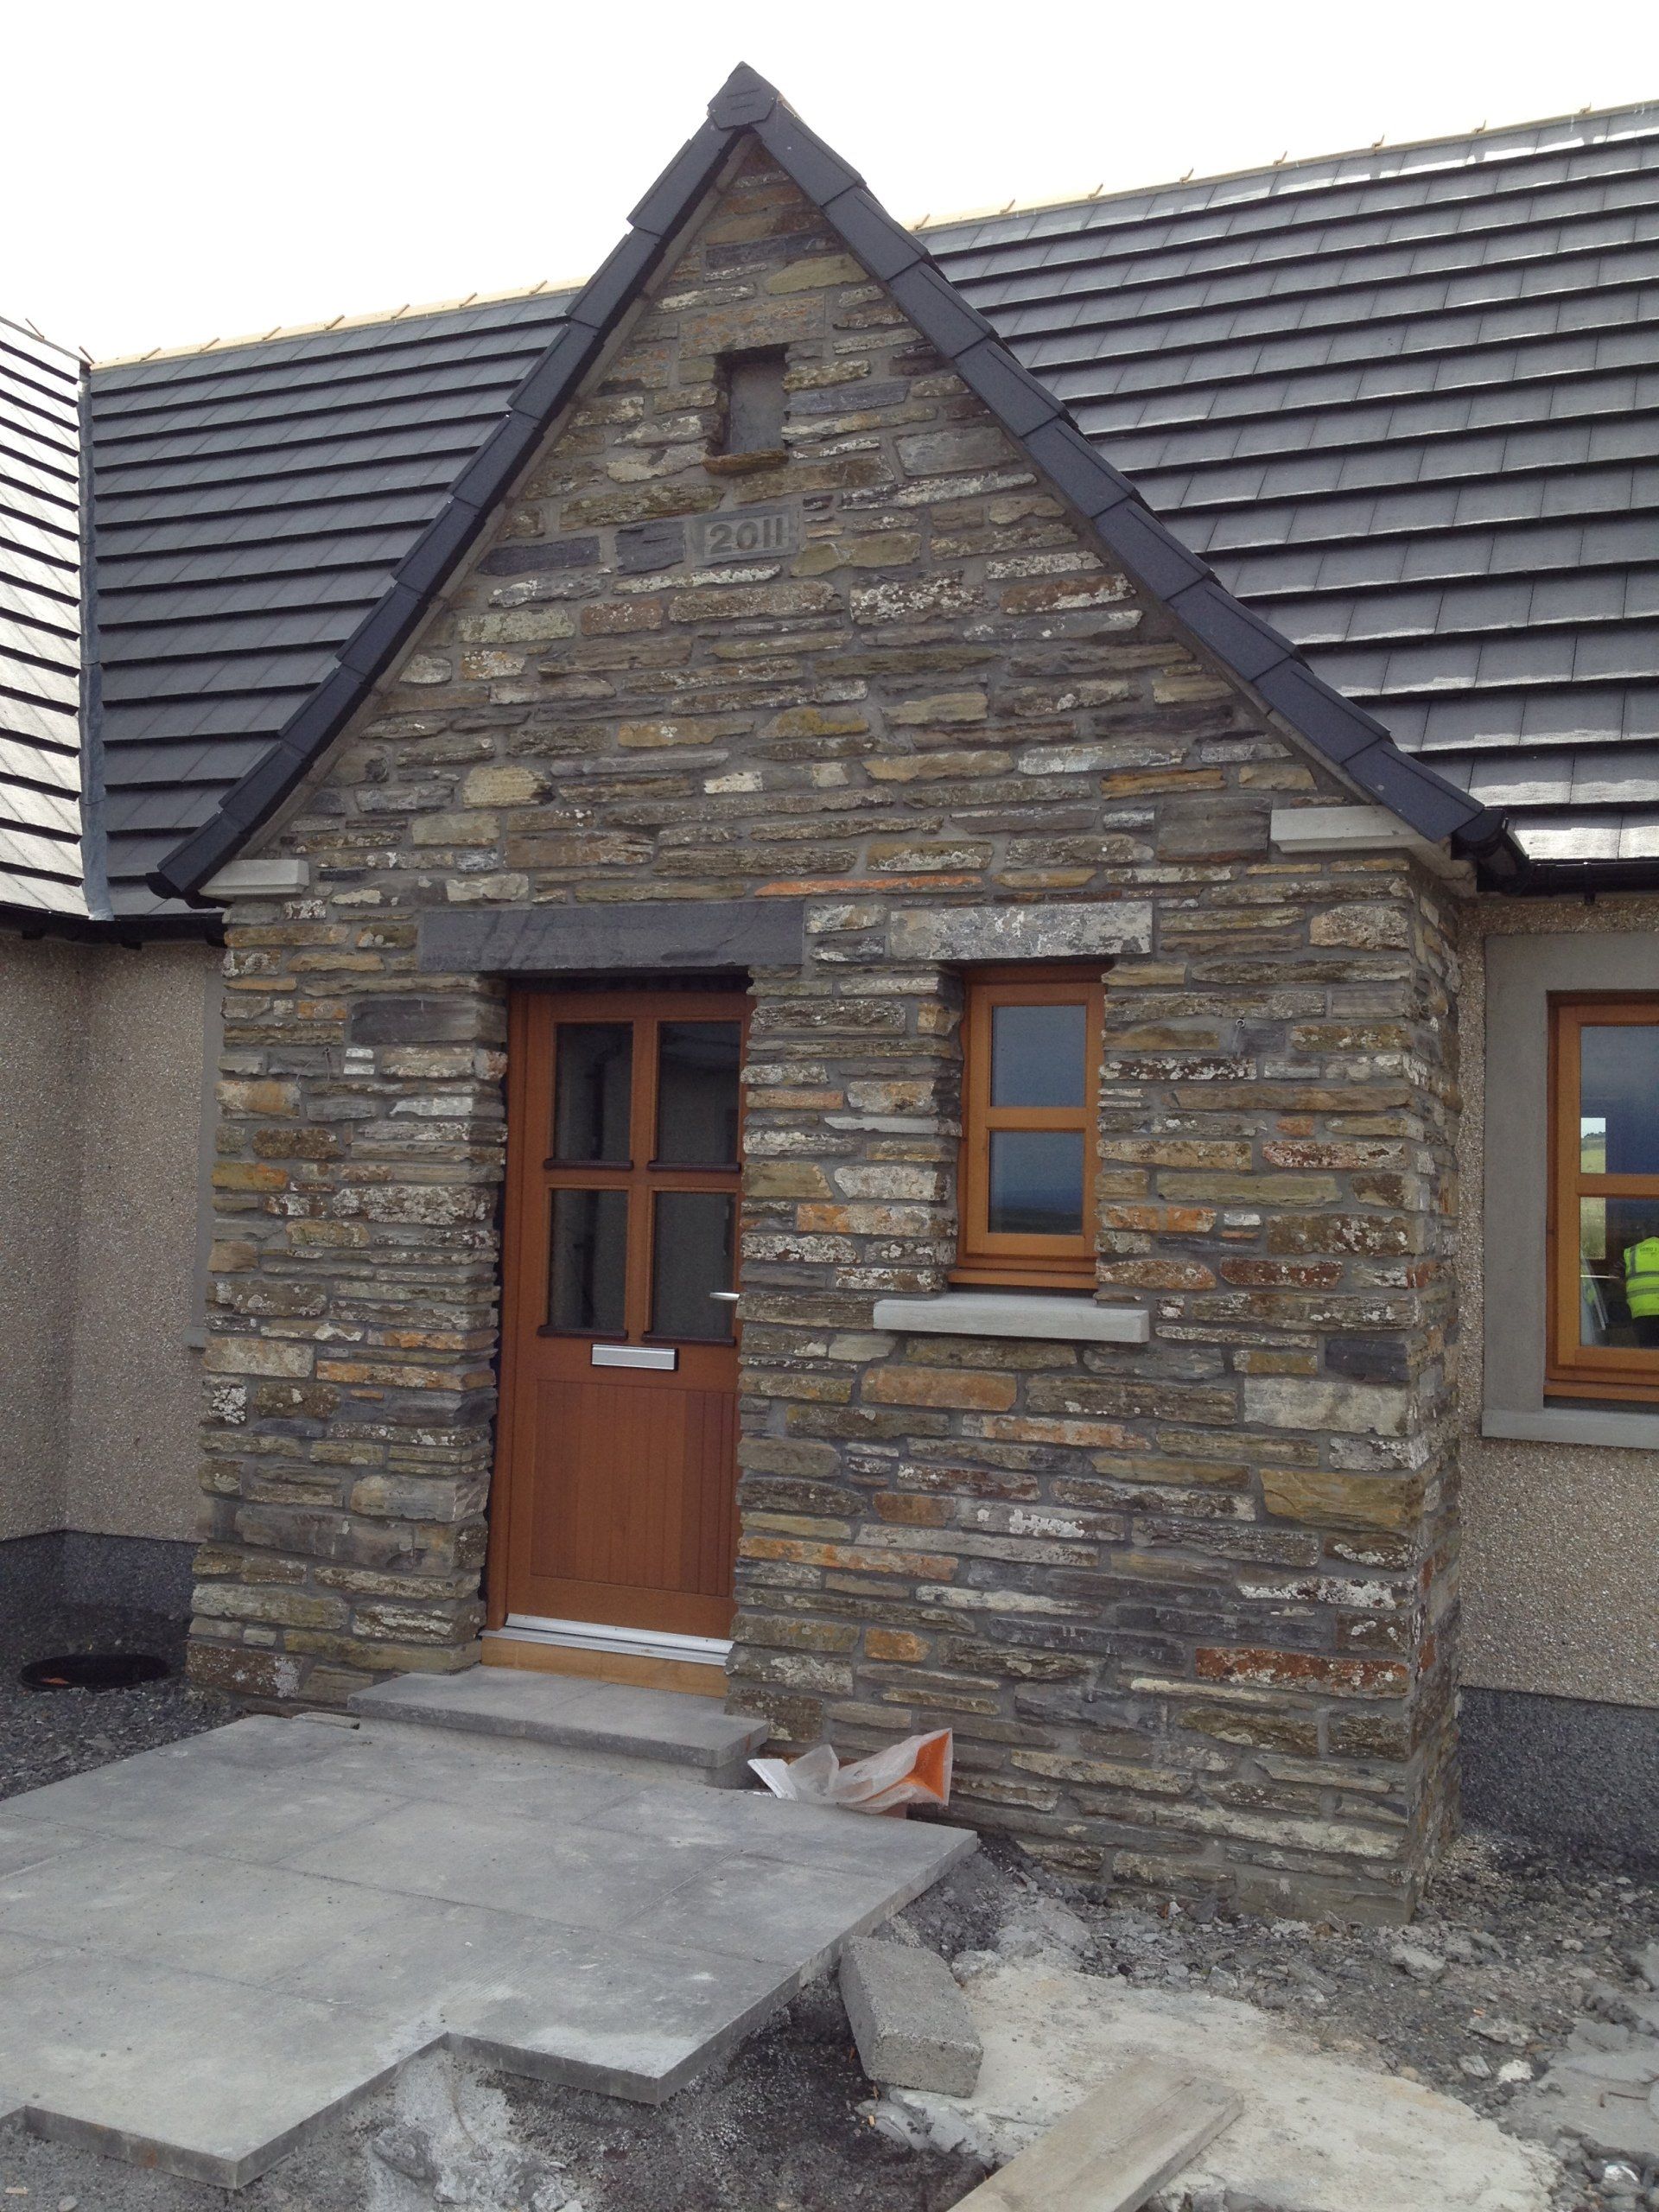 Bespoke feature porch using reclaimed Caithness stone